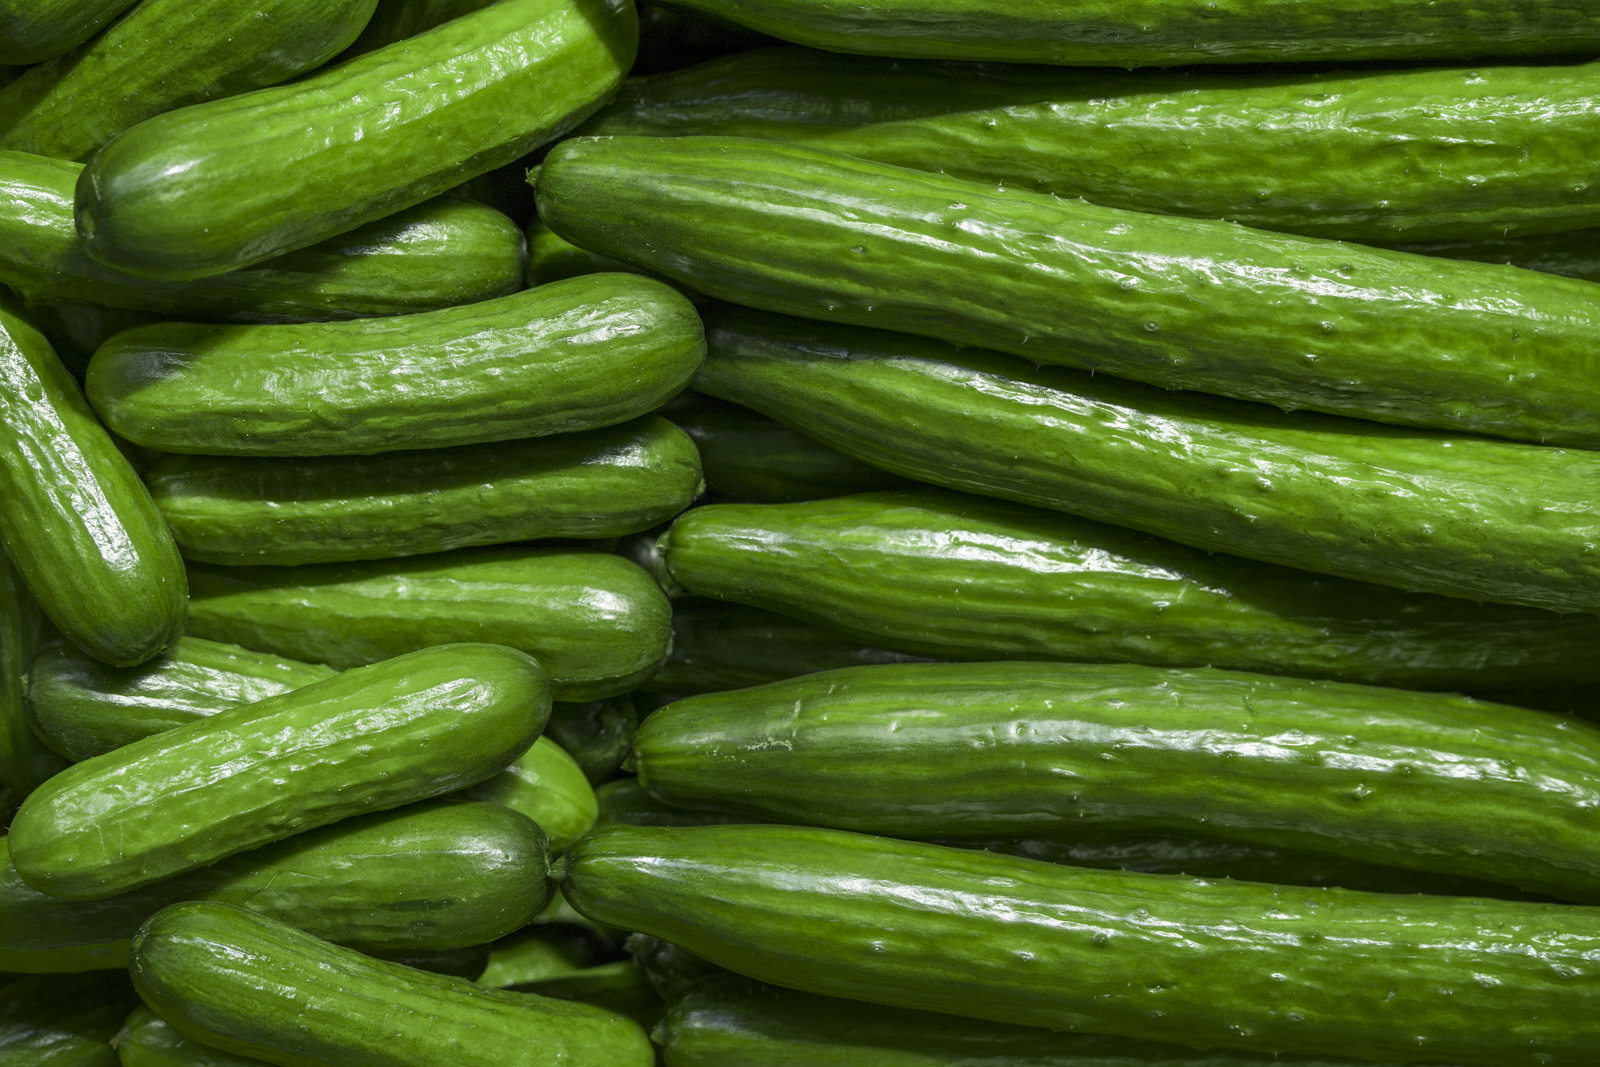 How to Store English Cucumbers